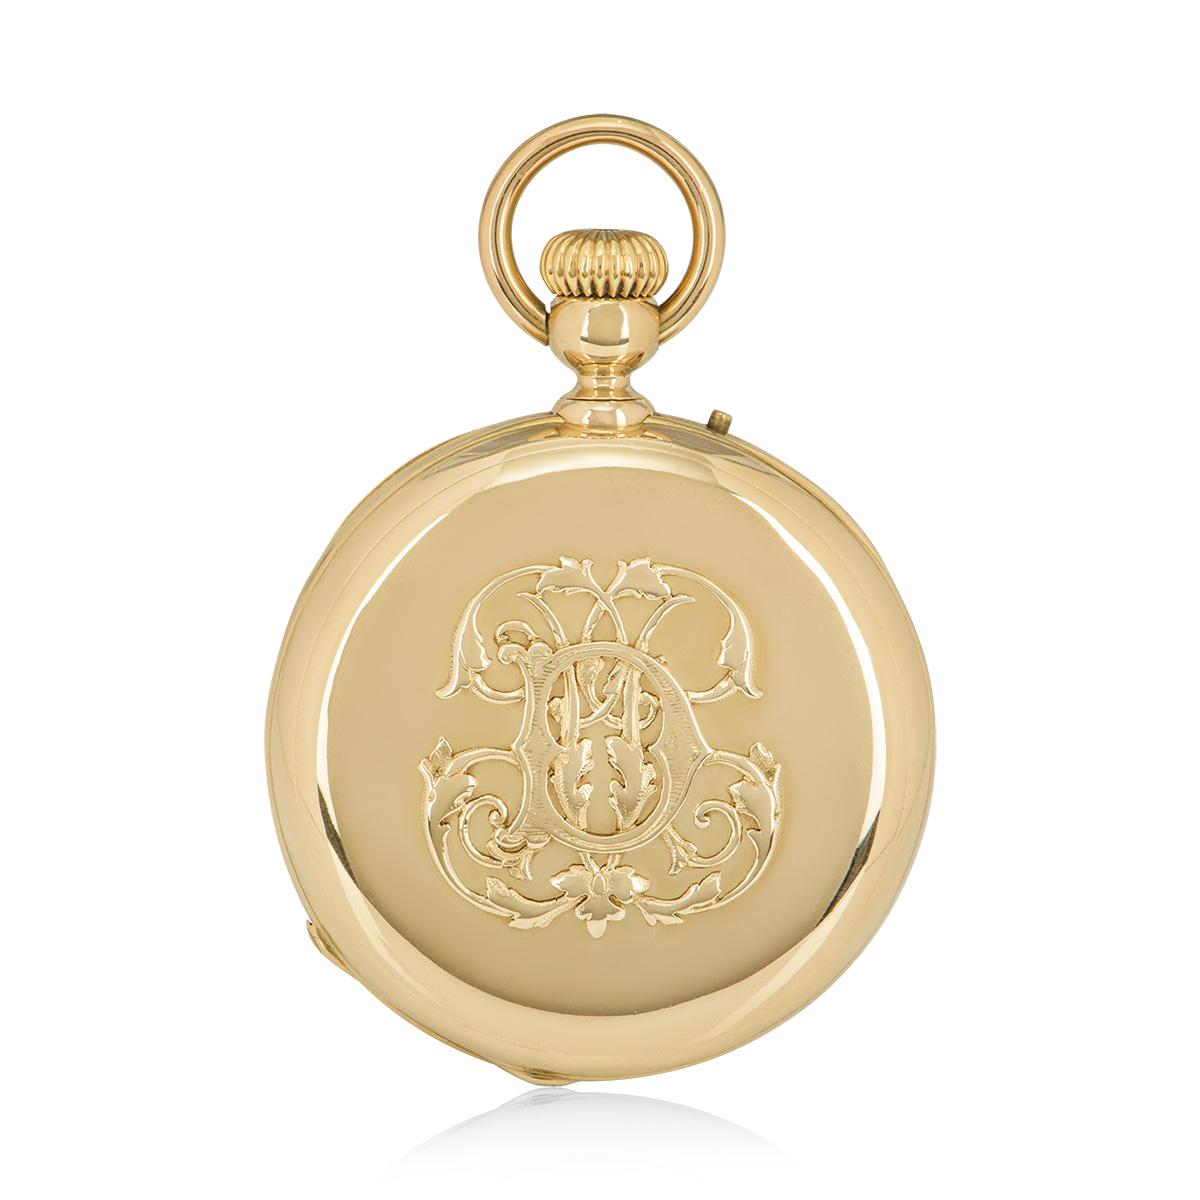 A 49 mm antique Bailley Levieux open face pocket watch in yellow gold, retailed by Golay Fils & Stahl. Featuring a white enamel dial with Roman numerals and a small seconds display. Fitted with mineral glass. The engraved case back opens up to